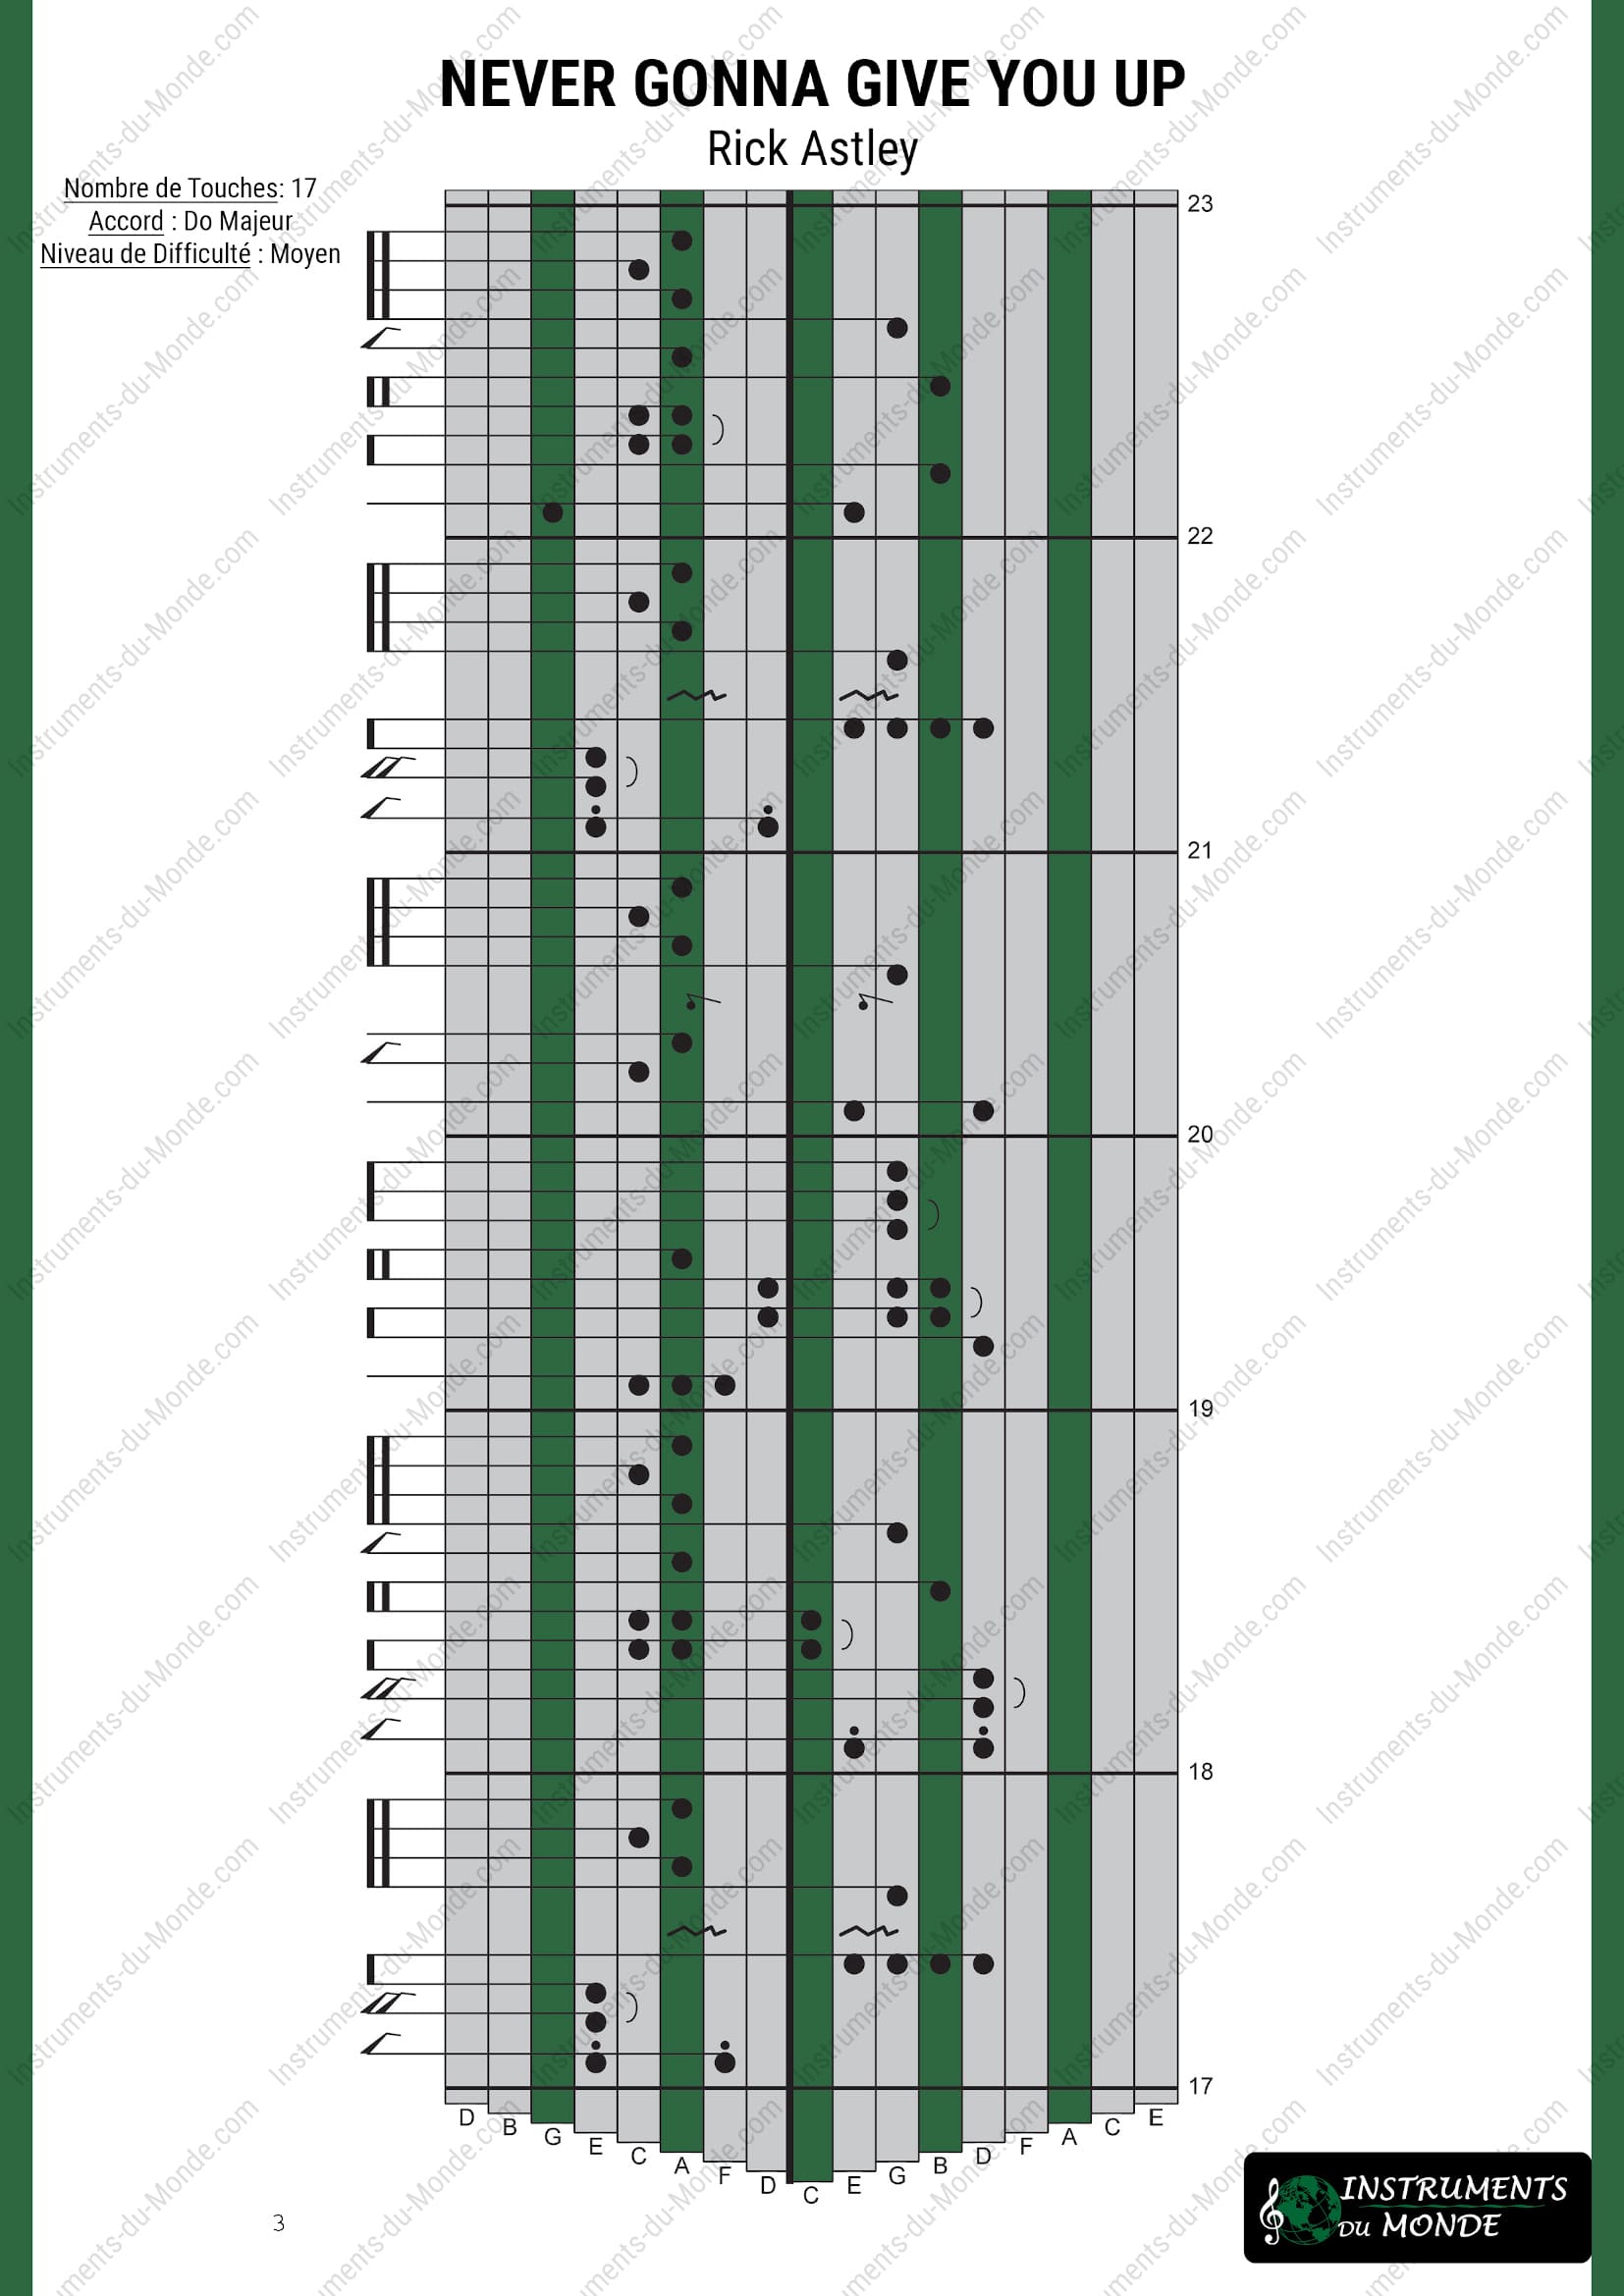 Tablature Kalimba Never Gonna Give You Up Rick Astley page 3